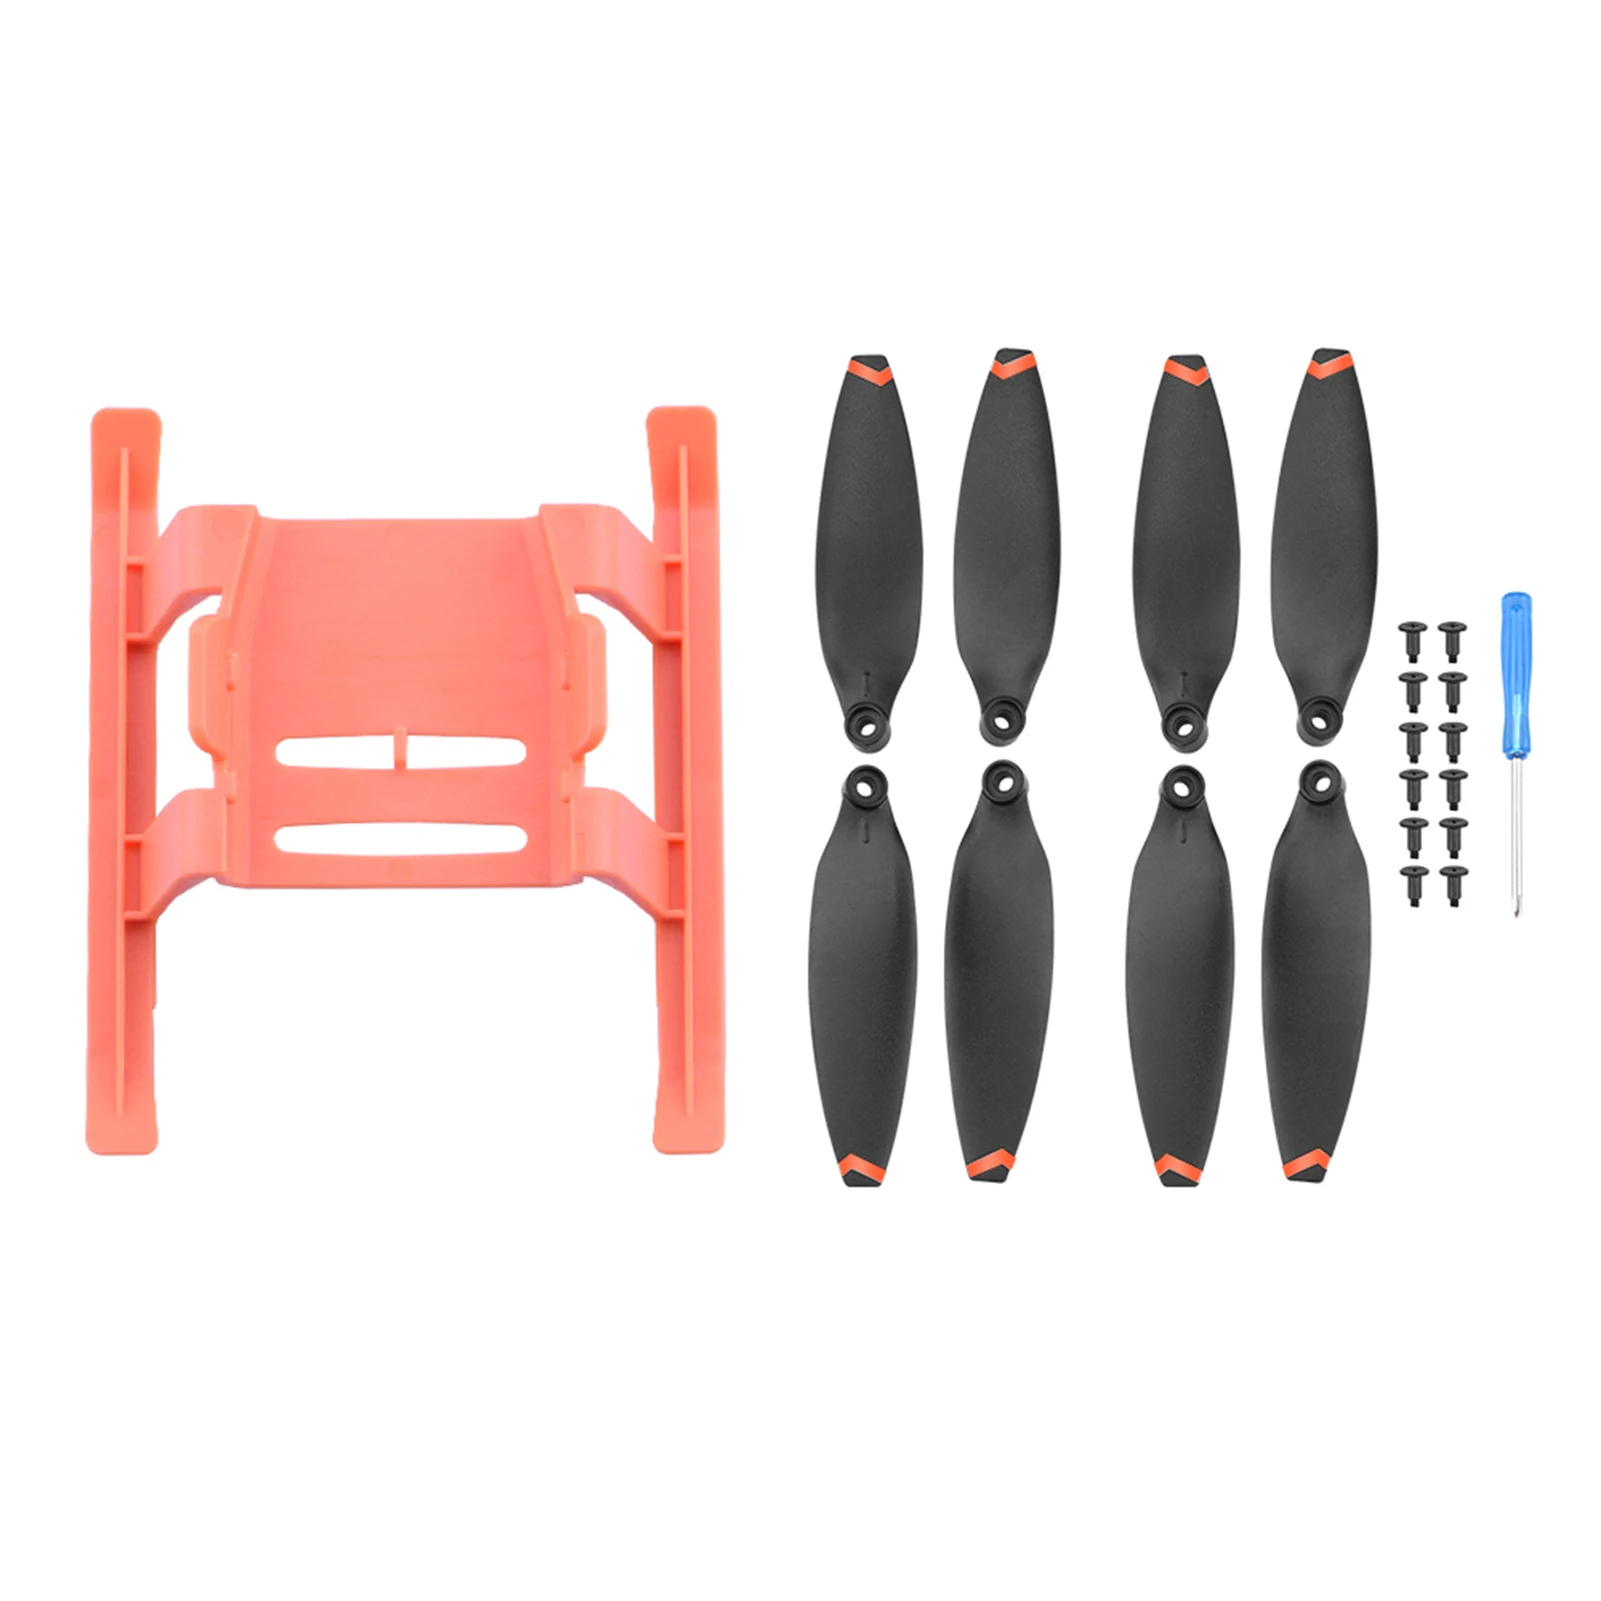 

Easy Install Support Professional Loading Extending Lightweight Quick Release Landing Gear Propeller Set Fit For FIMI X8 MINI